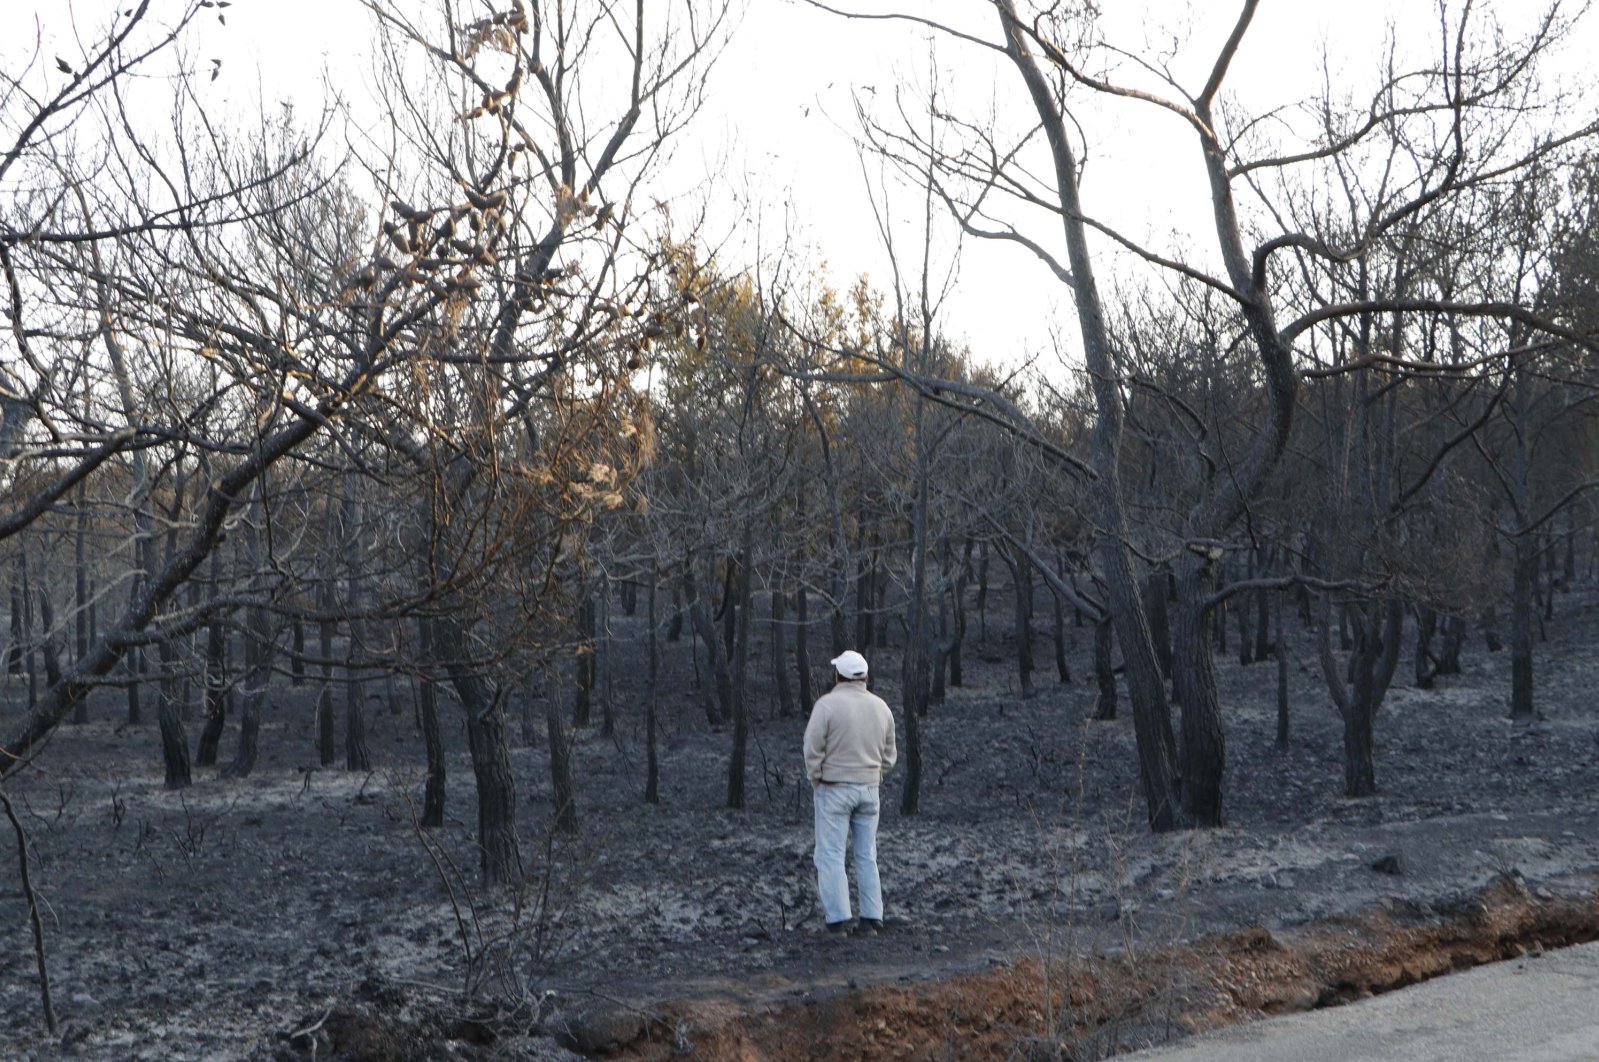 The fire affected an area of 80 hectares in Balıkesir's Ayvalık district. (DHA Photo)